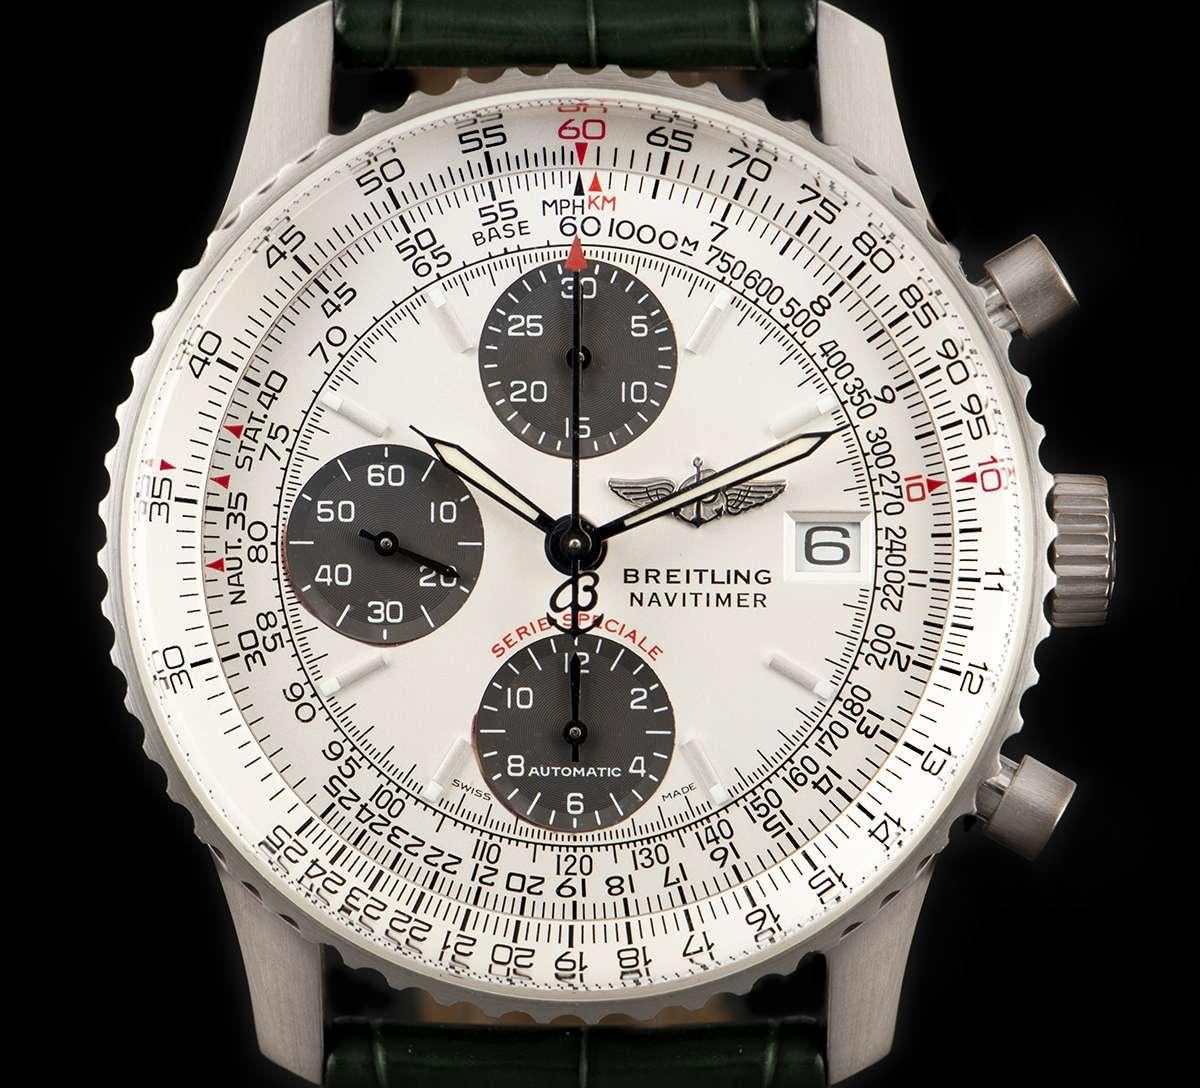 A Limited Edition Platinum Navitimer Gents 42mm Wristwatch, white dial with applied hour markers, date at 3 0'clock, 12 hour recorder at 6 0'clock, small seconds at 9 0'clock, 30 minute recorder at 12 0'clock, tachymeter scale on the outer edge of